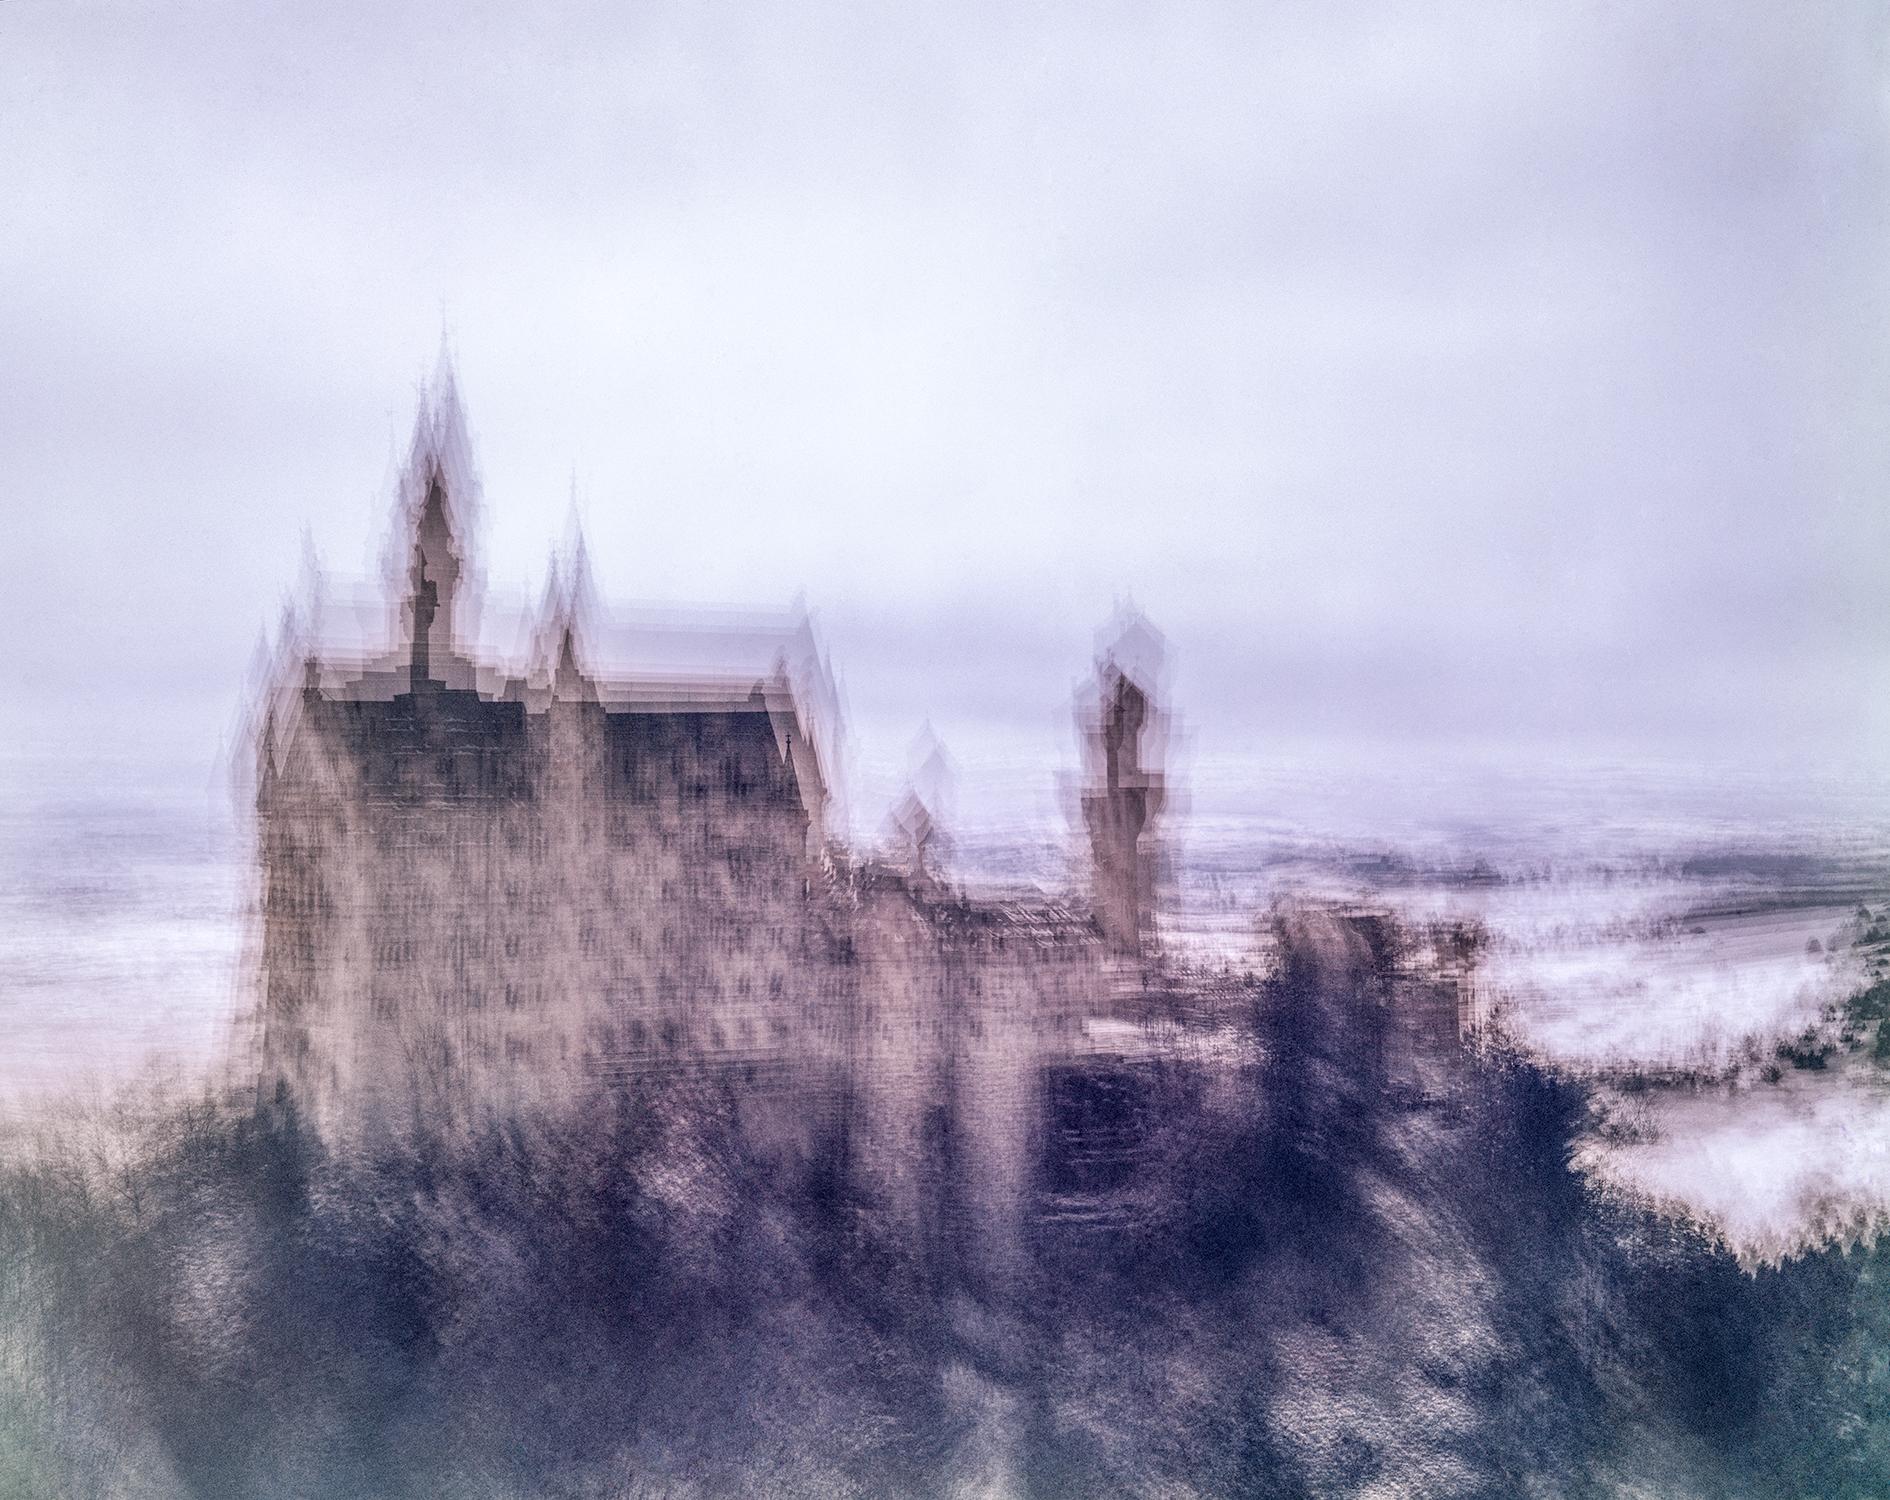 Poby Abstract Photograph - Castle Neuschwanstein, Germany